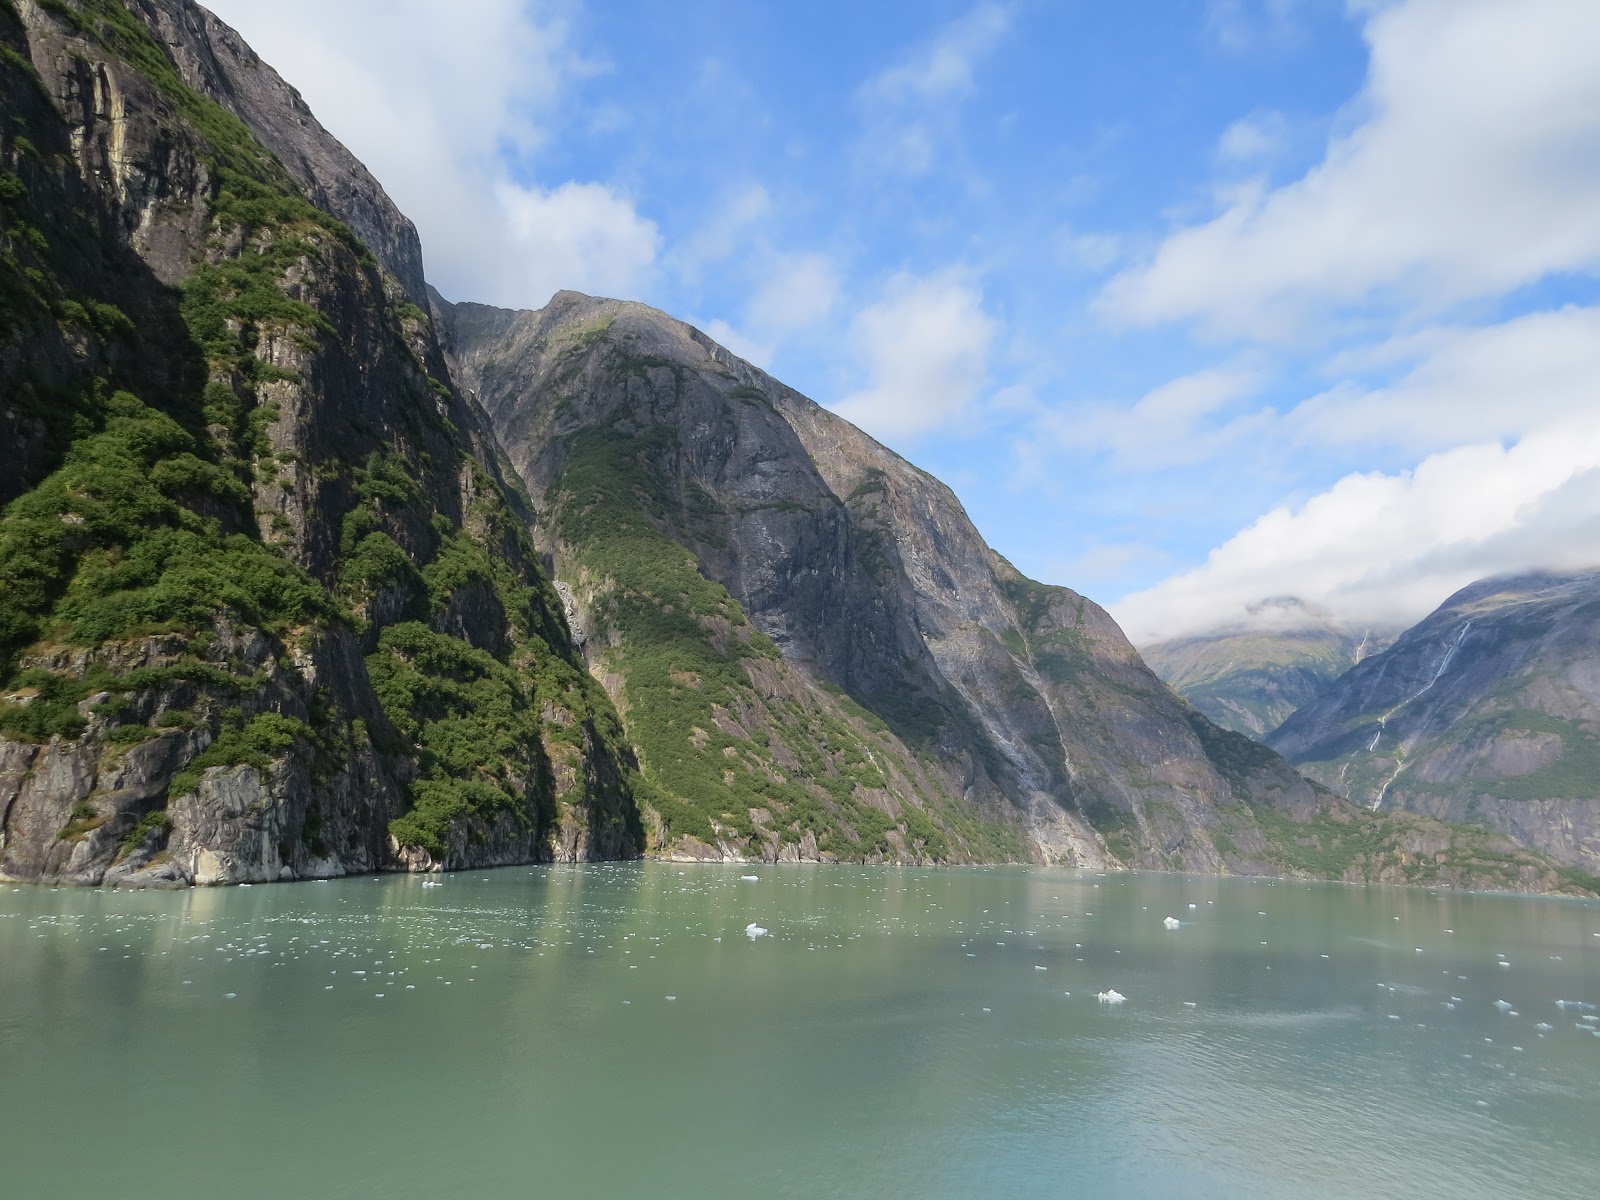 Have Book, Will Travel: Tracy Arm Fjord, Alaska